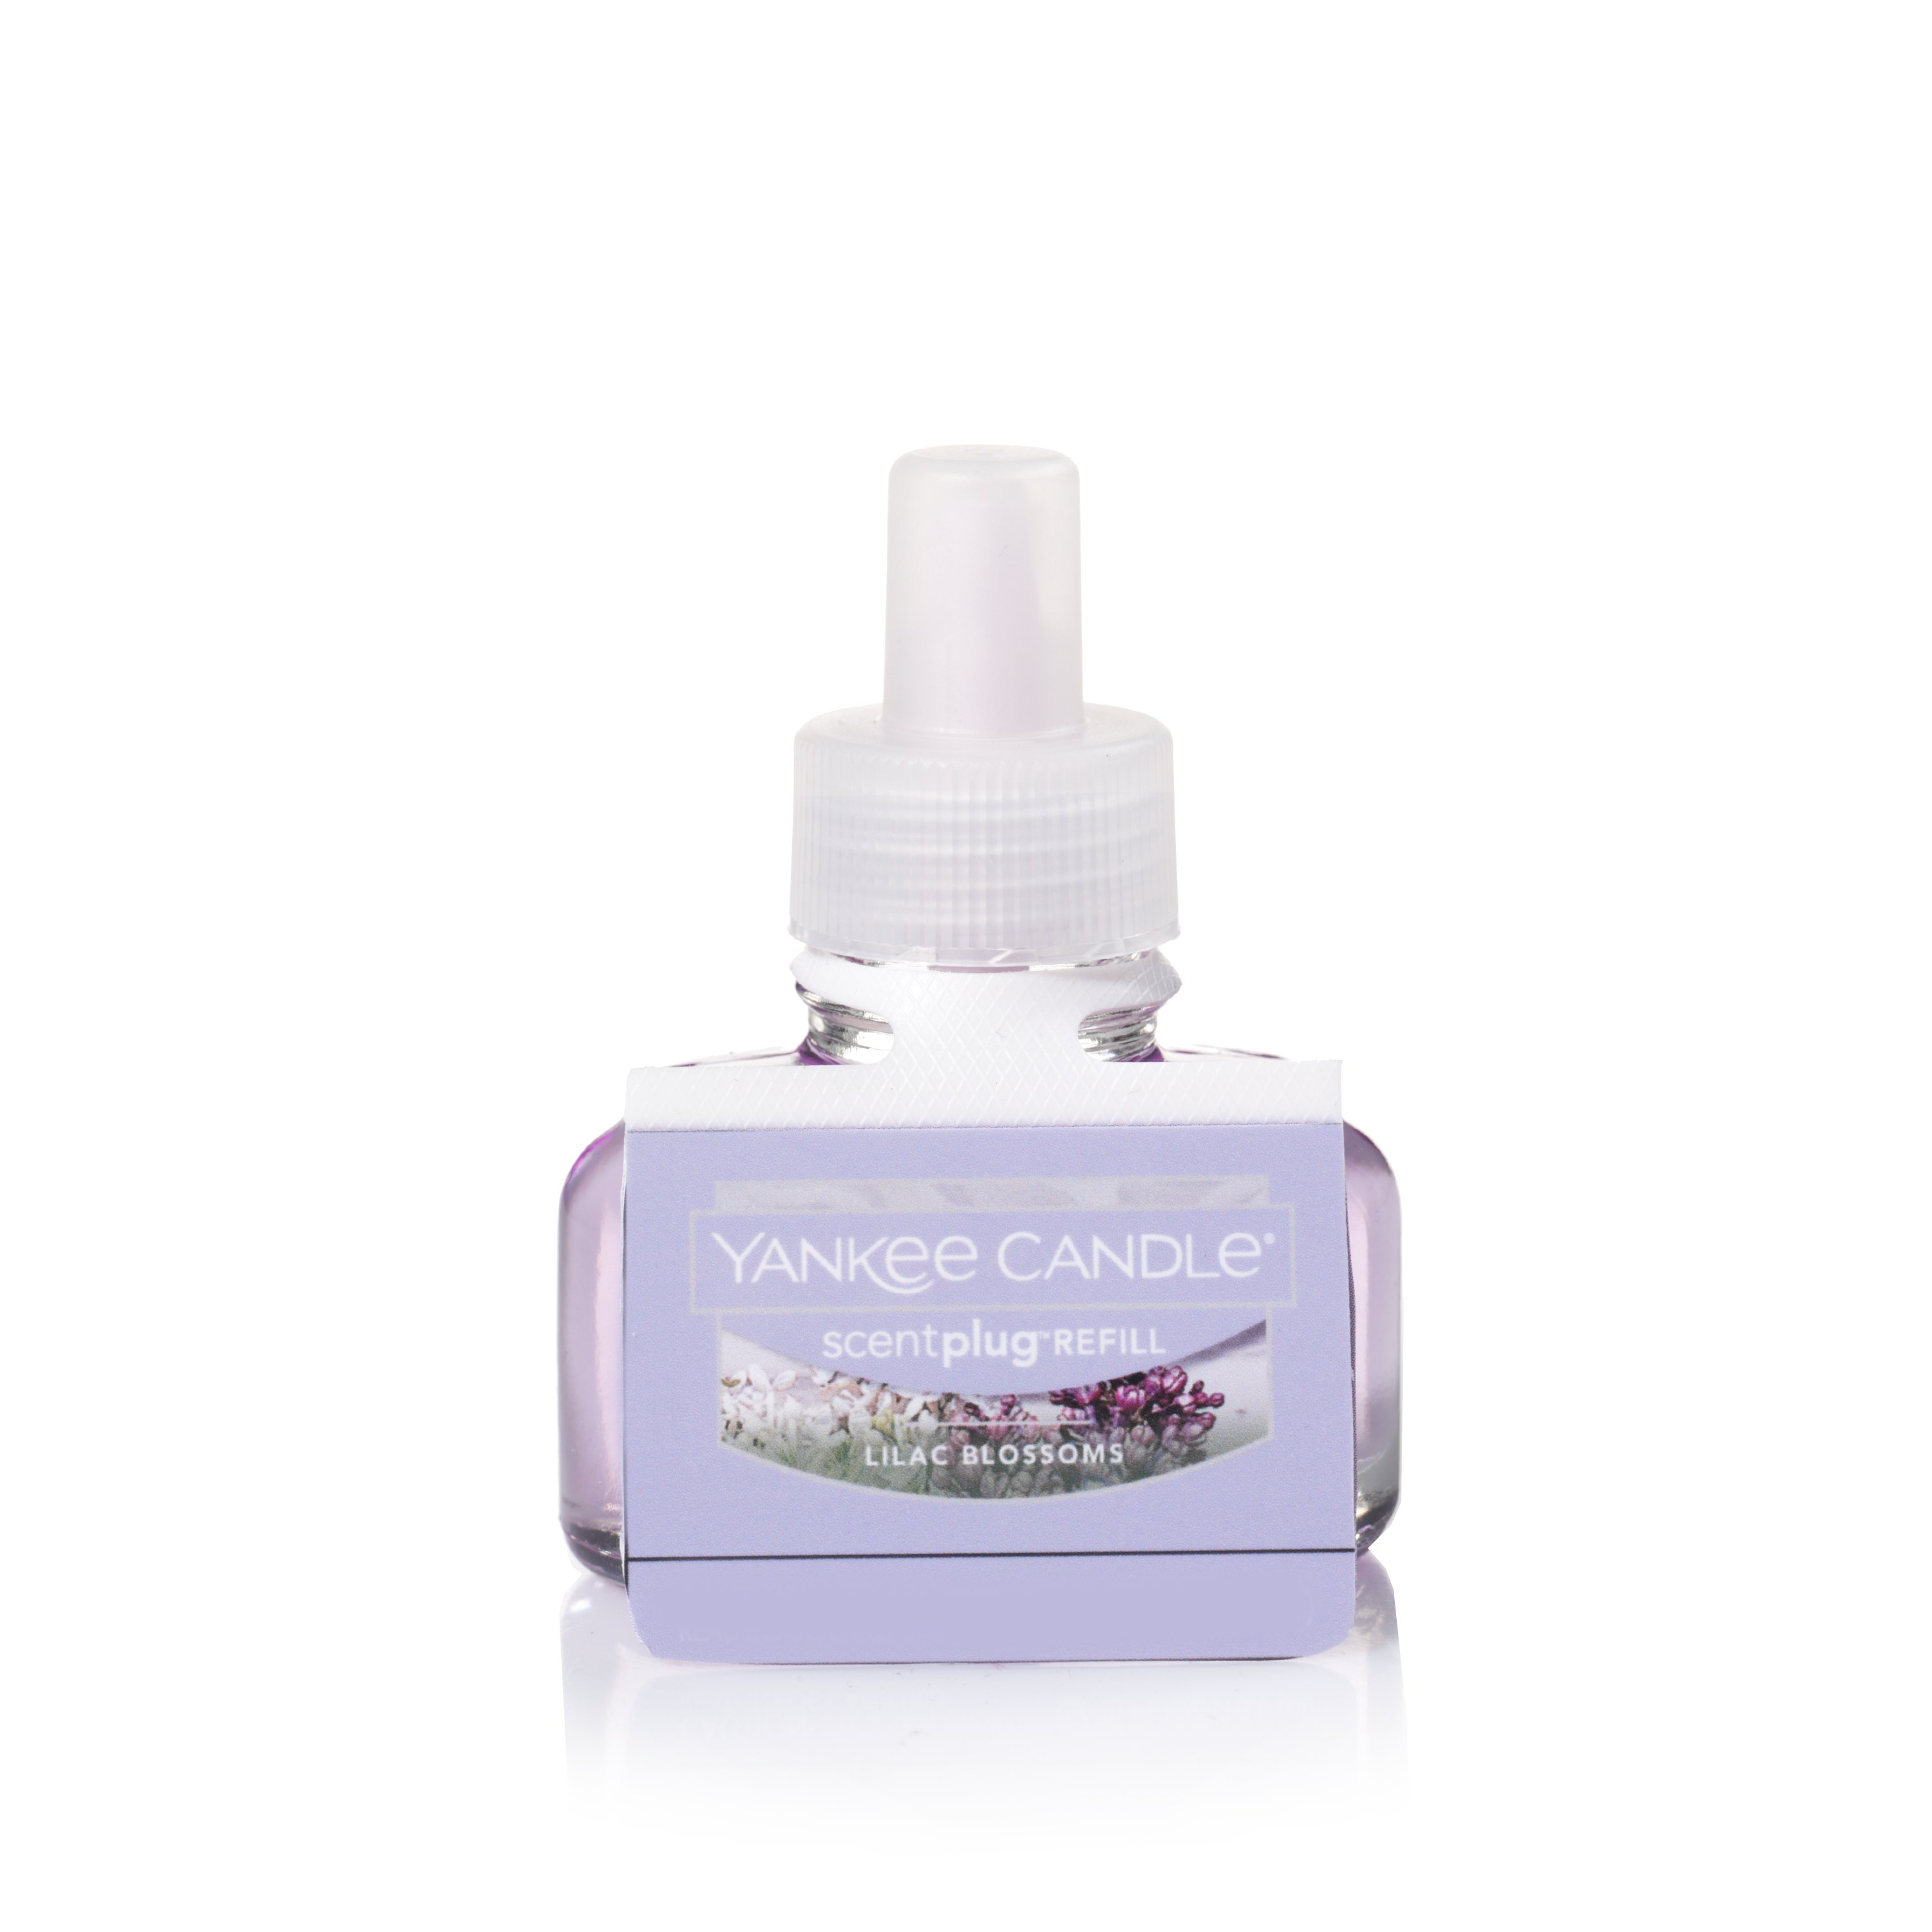 Yankee Candle ScentPlug Refill, Lilac Blossoms - 0.625 (18.5 ml)